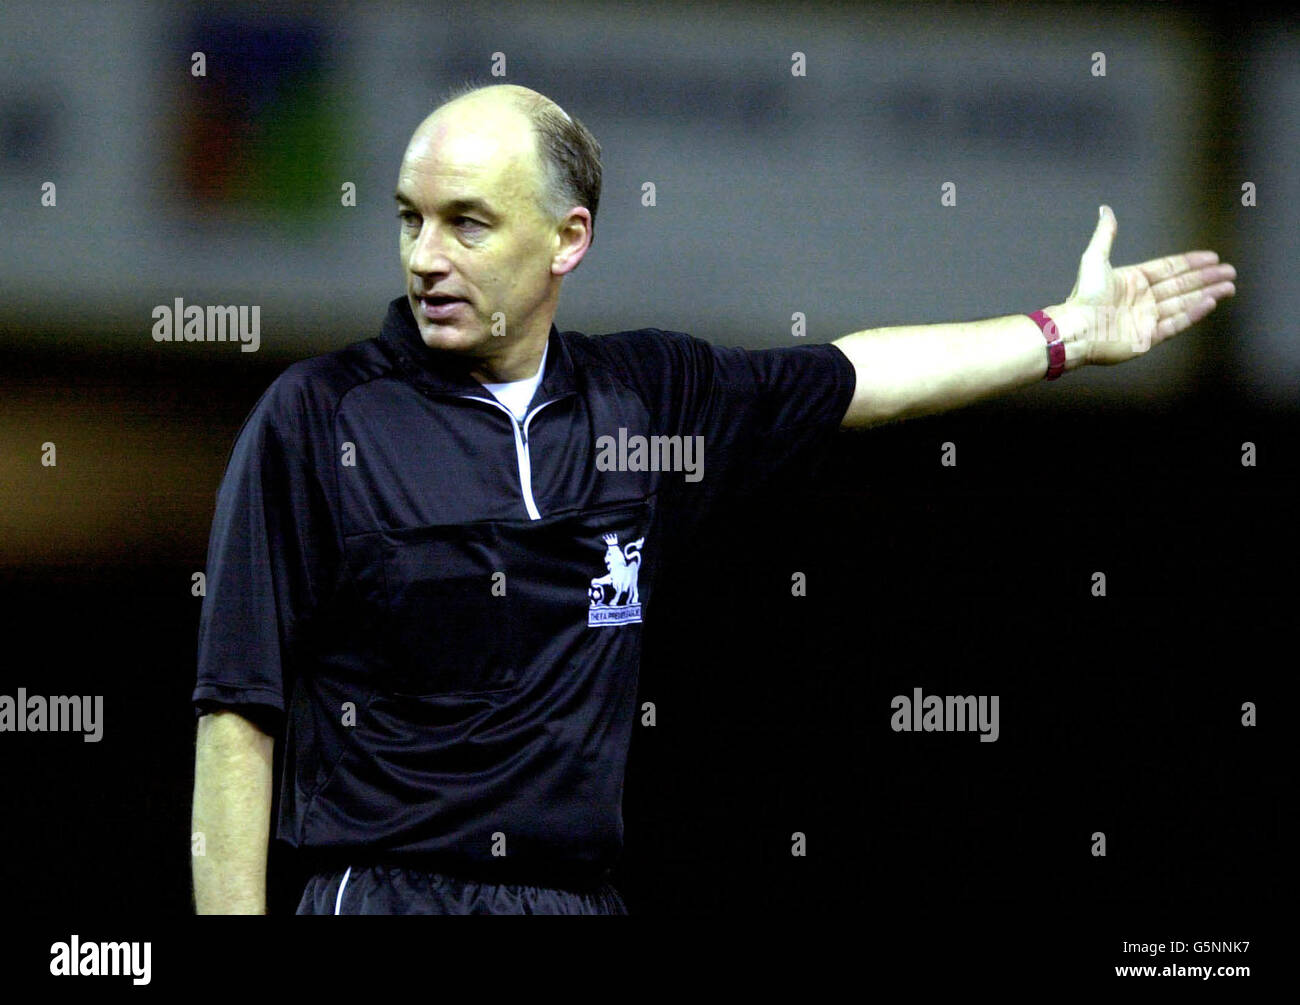 Referee David Elleray during the Barclaycard Premiership clash between Leicester City v Arsenal at Filbert Street. *28/12/03: David Elleray the former official who has warned football 'will die' unless the issue of referee recruitment is addressed and more ex-players are persuaded to take up the whistle. The Harrow schoolmaster, who retired at the end of last season, claimed more needed to be done to channel some of the hundreds of former professional footballers into refereeing to improve standards and keep the game alive. Stock Photo